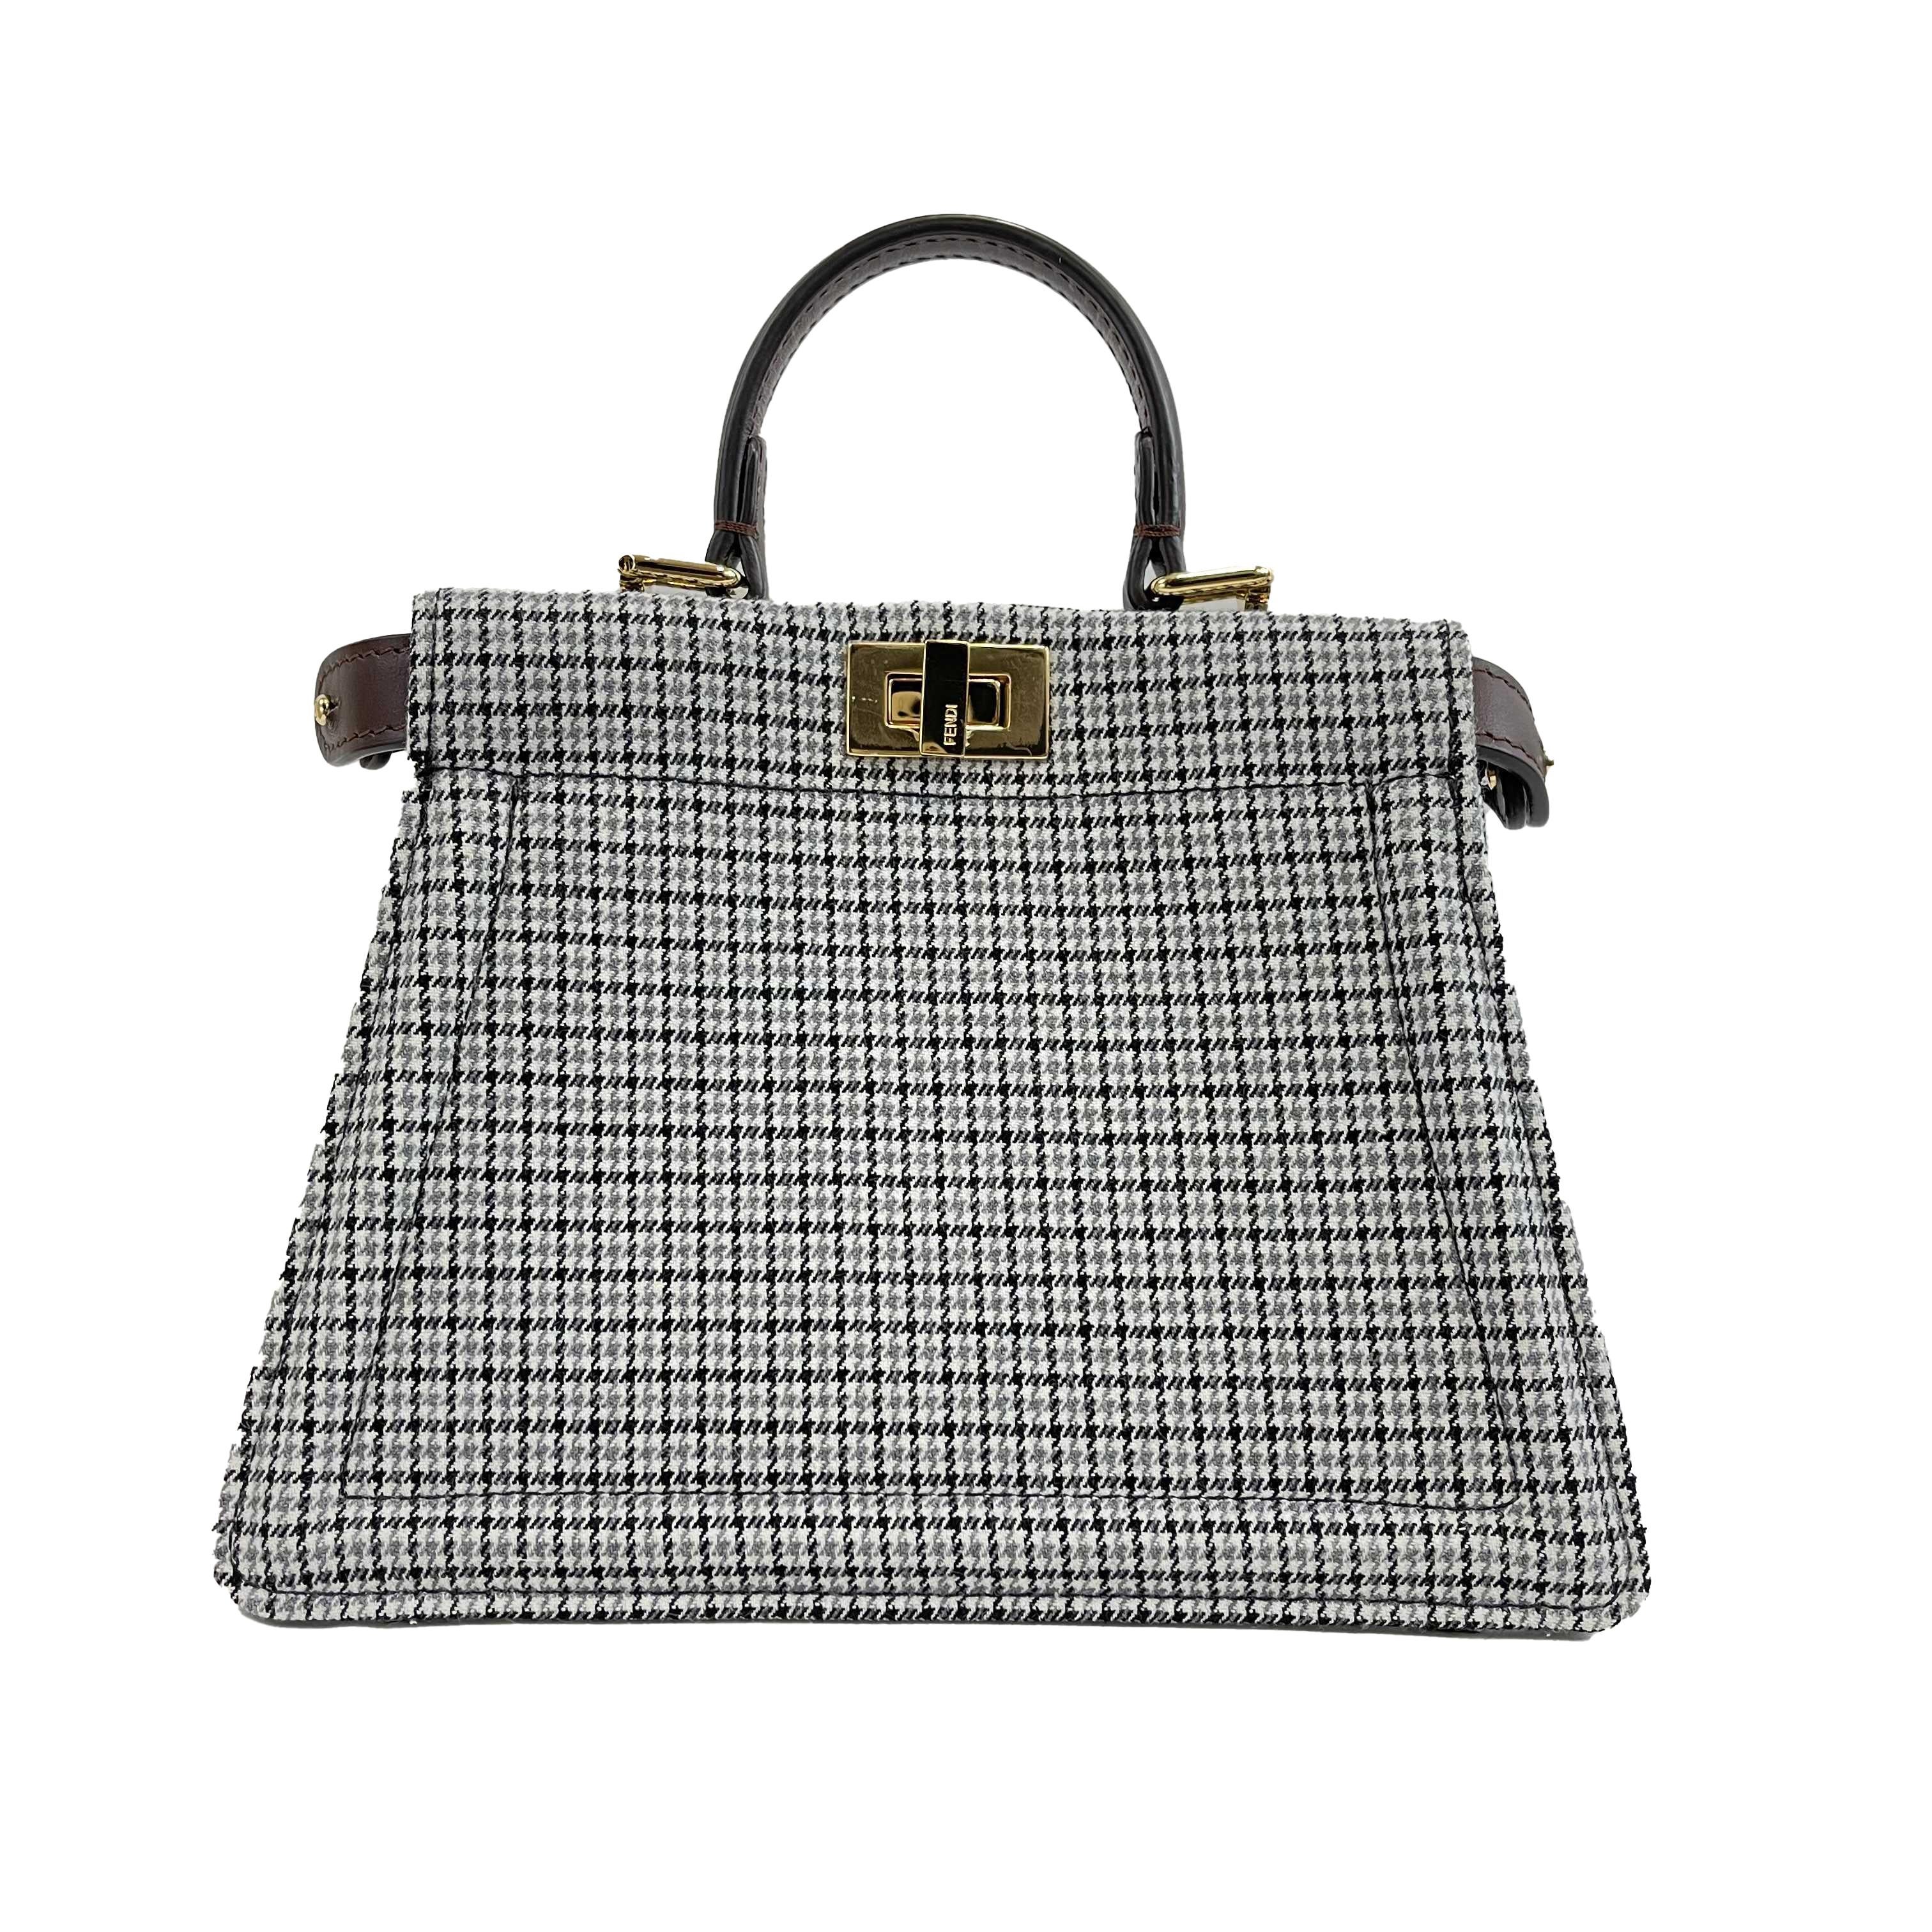 Fendi - New w/o Tags - Wool Fabric Jacquard Cuoio Houndstooth FF 1974 Petite Peekaboo - Black, Gray, White, Brown - Handbag

Description

Gray houndstooth fabric
Brown leather handle and details
Gold hardware
Two compartments
Two interior flat